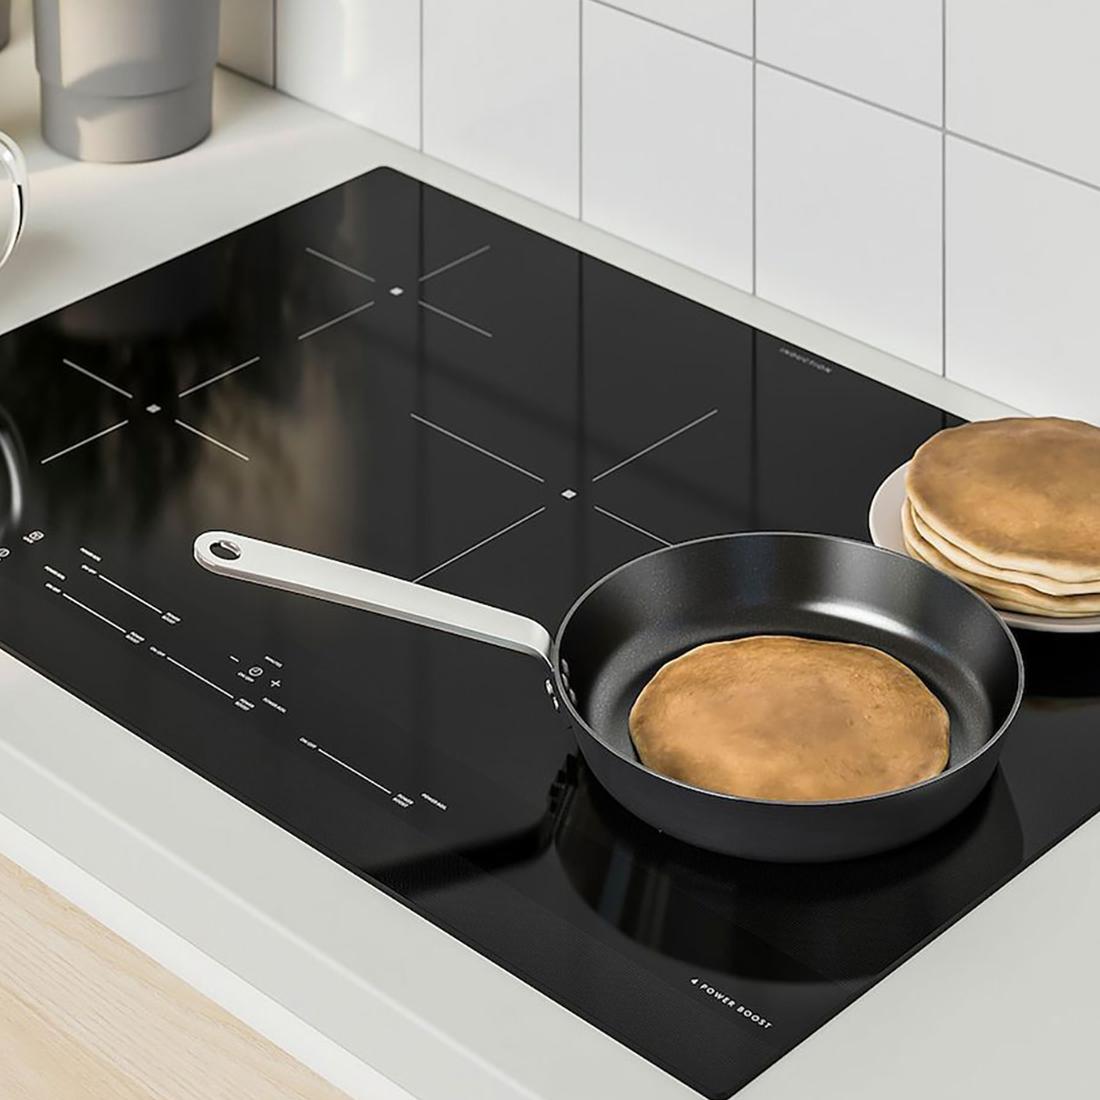 Easy-to-Clean Induction Cooktop with Elegant Design